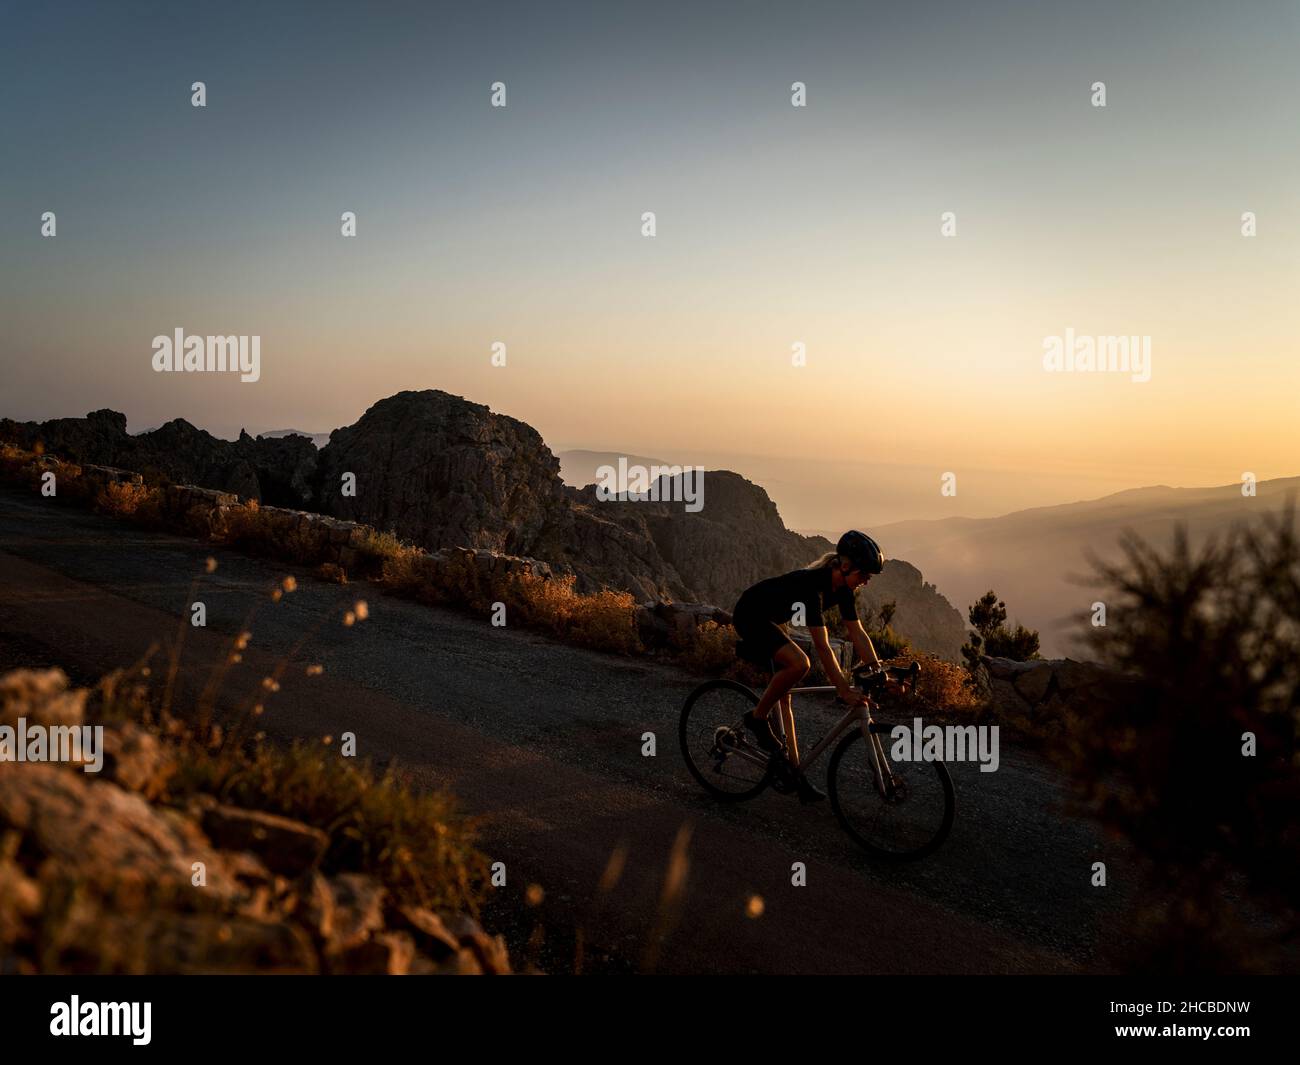 Athlete cycling on mountain road at sunset Stock Photo